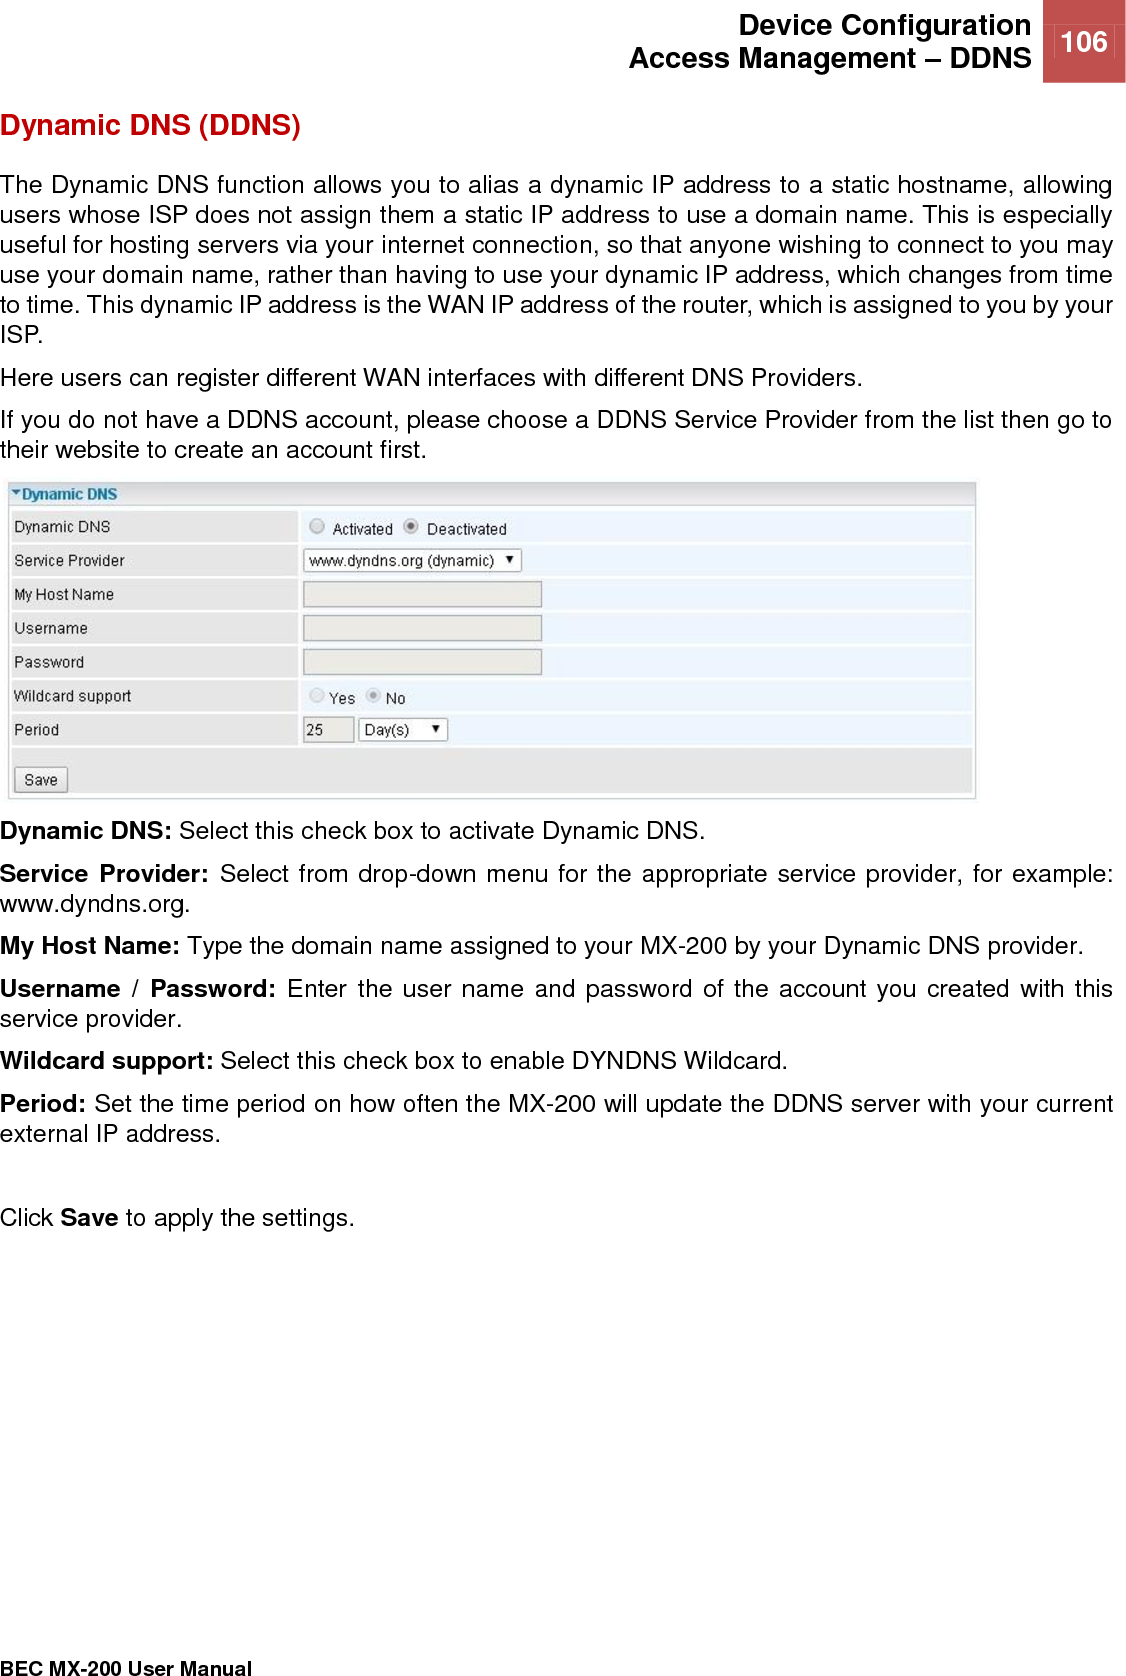  Device Configuration Access Management – DDNS 106   BEC MX-200 User Manual  Dynamic DNS (DDNS) The Dynamic DNS function allows you to alias a dynamic IP address to a static hostname, allowing users whose ISP does not assign them a static IP address to use a domain name. This is especially useful for hosting servers via your internet connection, so that anyone wishing to connect to you may use your domain name, rather than having to use your dynamic IP address, which changes from time to time. This dynamic IP address is the WAN IP address of the router, which is assigned to you by your ISP. Here users can register different WAN interfaces with different DNS Providers. If you do not have a DDNS account, please choose a DDNS Service Provider from the list then go to their website to create an account first.    Dynamic DNS: Select this check box to activate Dynamic DNS. Service Provider:  Select from drop-down menu for the appropriate service provider, for example: www.dyndns.org. My Host Name: Type the domain name assigned to your MX-200 by your Dynamic DNS provider. Username  /  Password: Enter the user name and password of the account you created with this service provider.  Wildcard support: Select this check box to enable DYNDNS Wildcard. Period: Set the time period on how often the MX-200 will update the DDNS server with your current external IP address.   Click Save to apply the settings.   